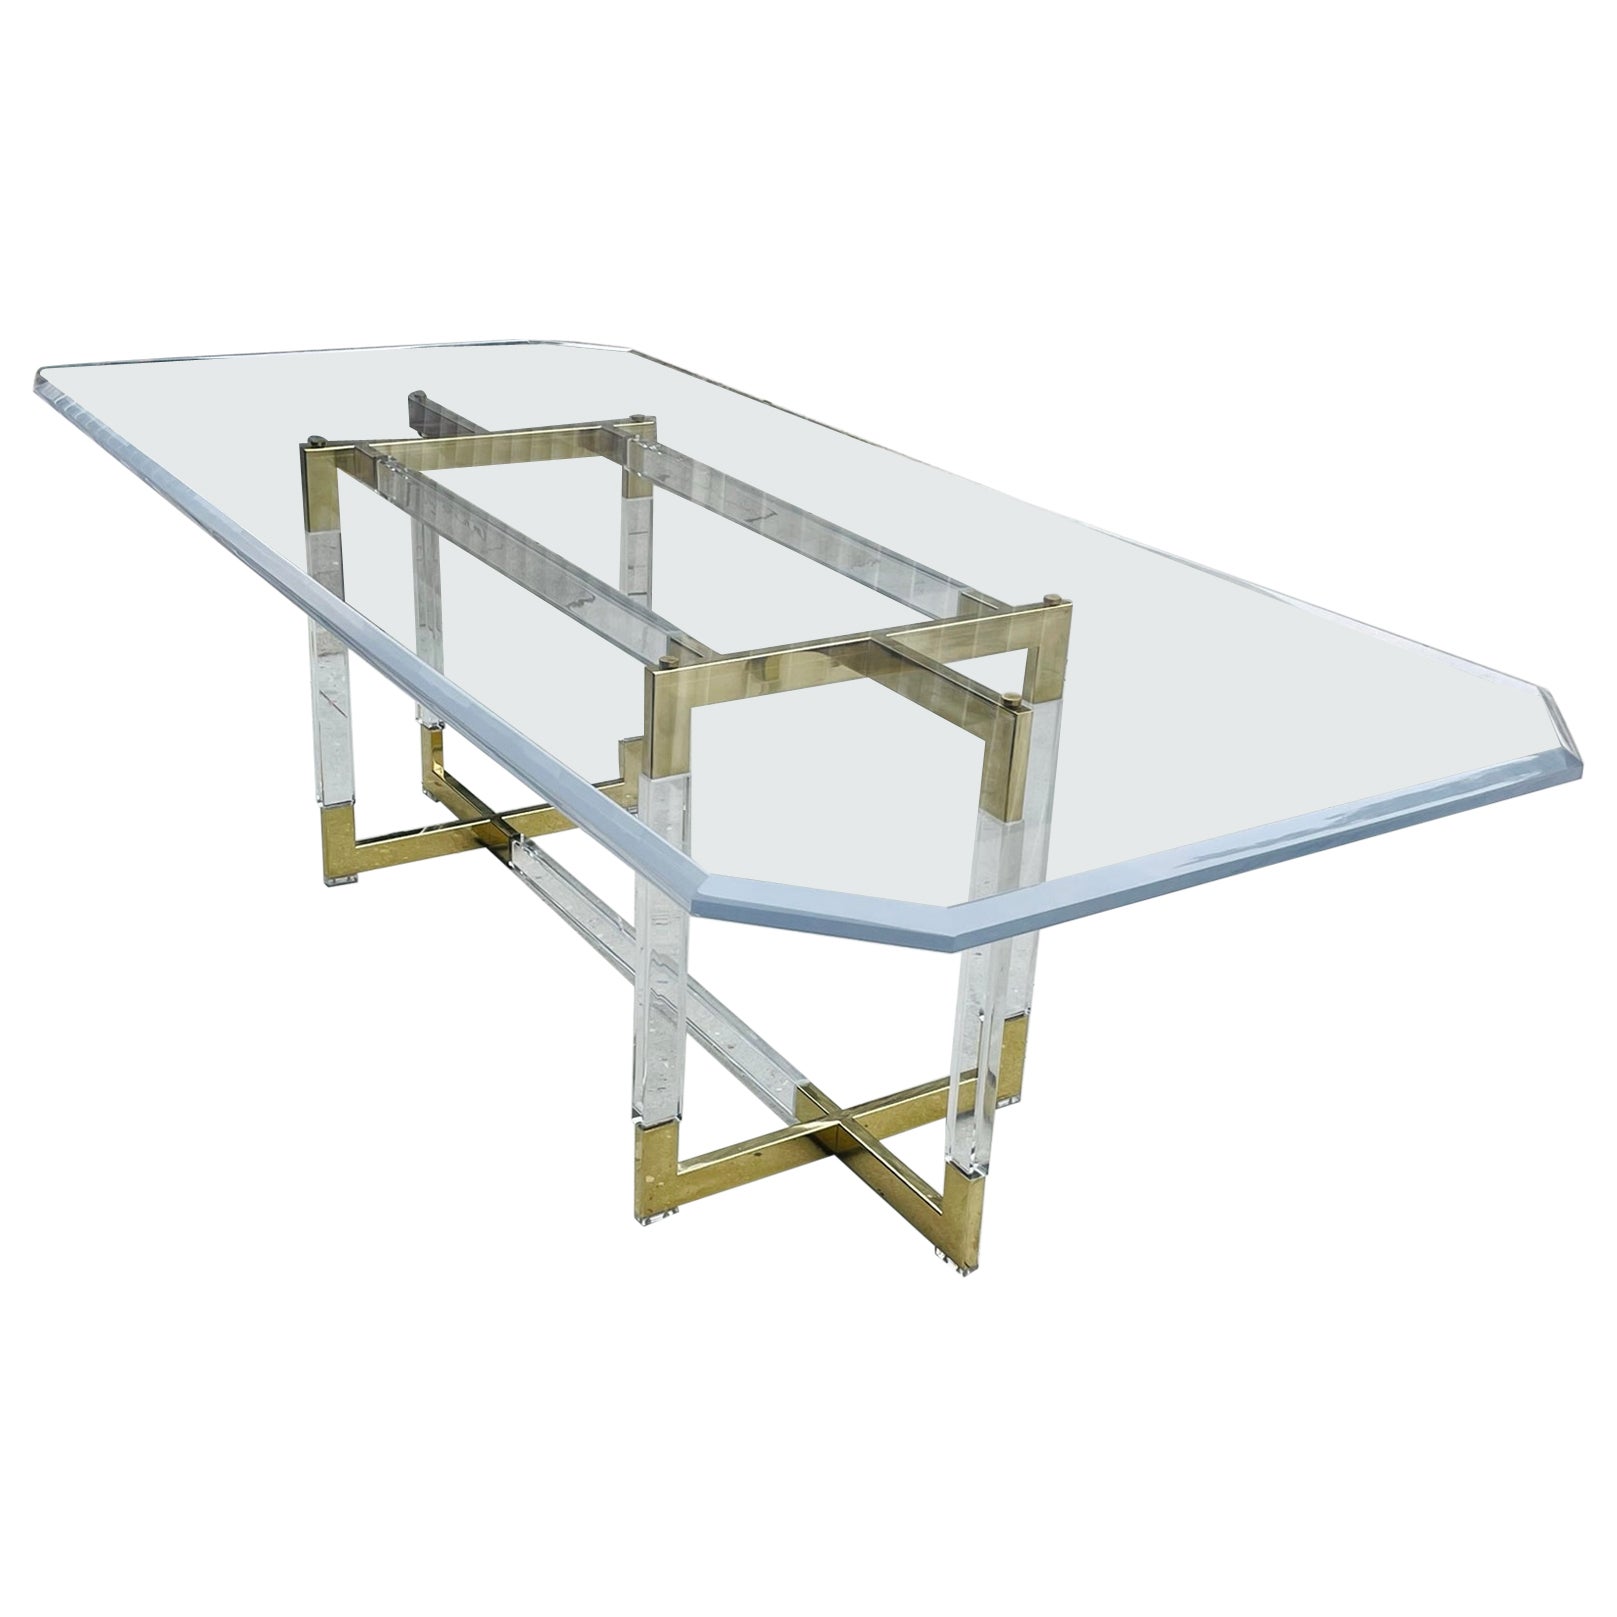 Charles Hollis Jones Lucite & Brass Dining Table from the "Metric" Collection, S For Sale